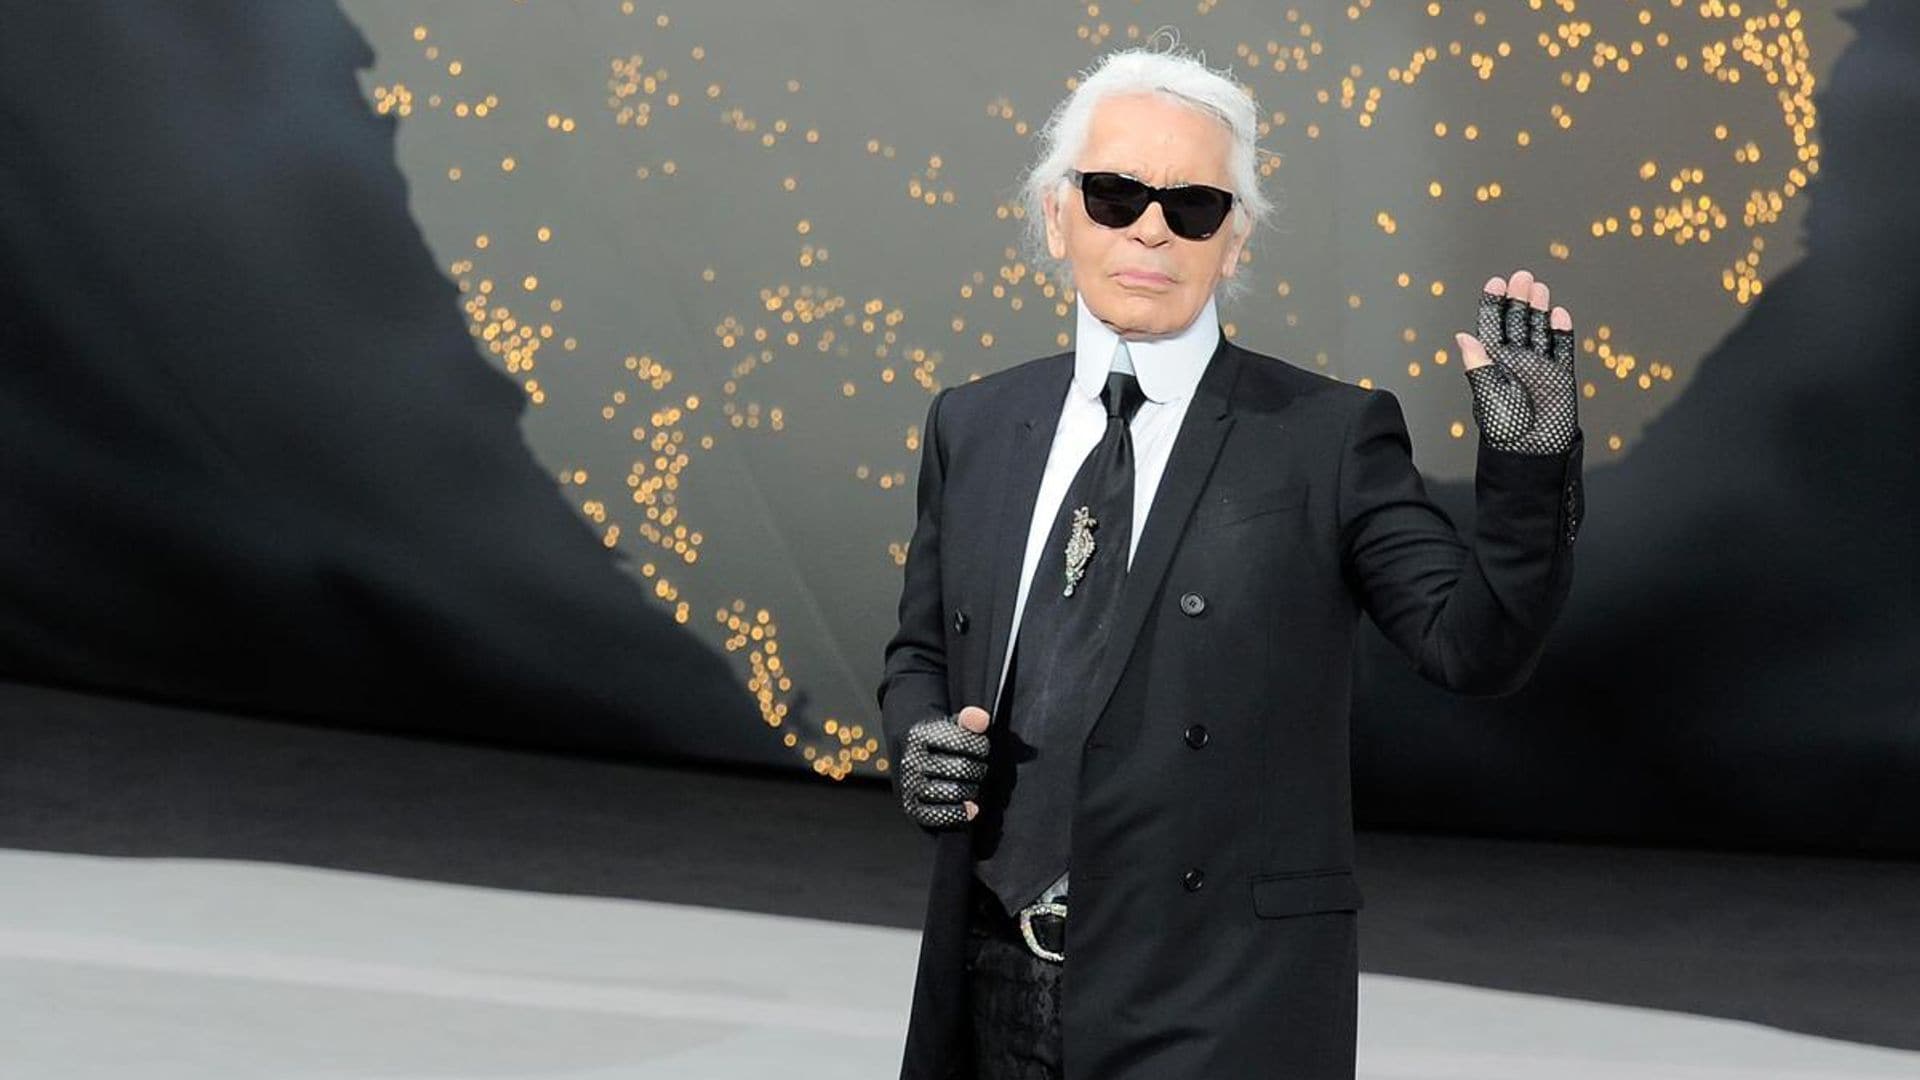 Karl Lagerfeld’s most memorable quotes